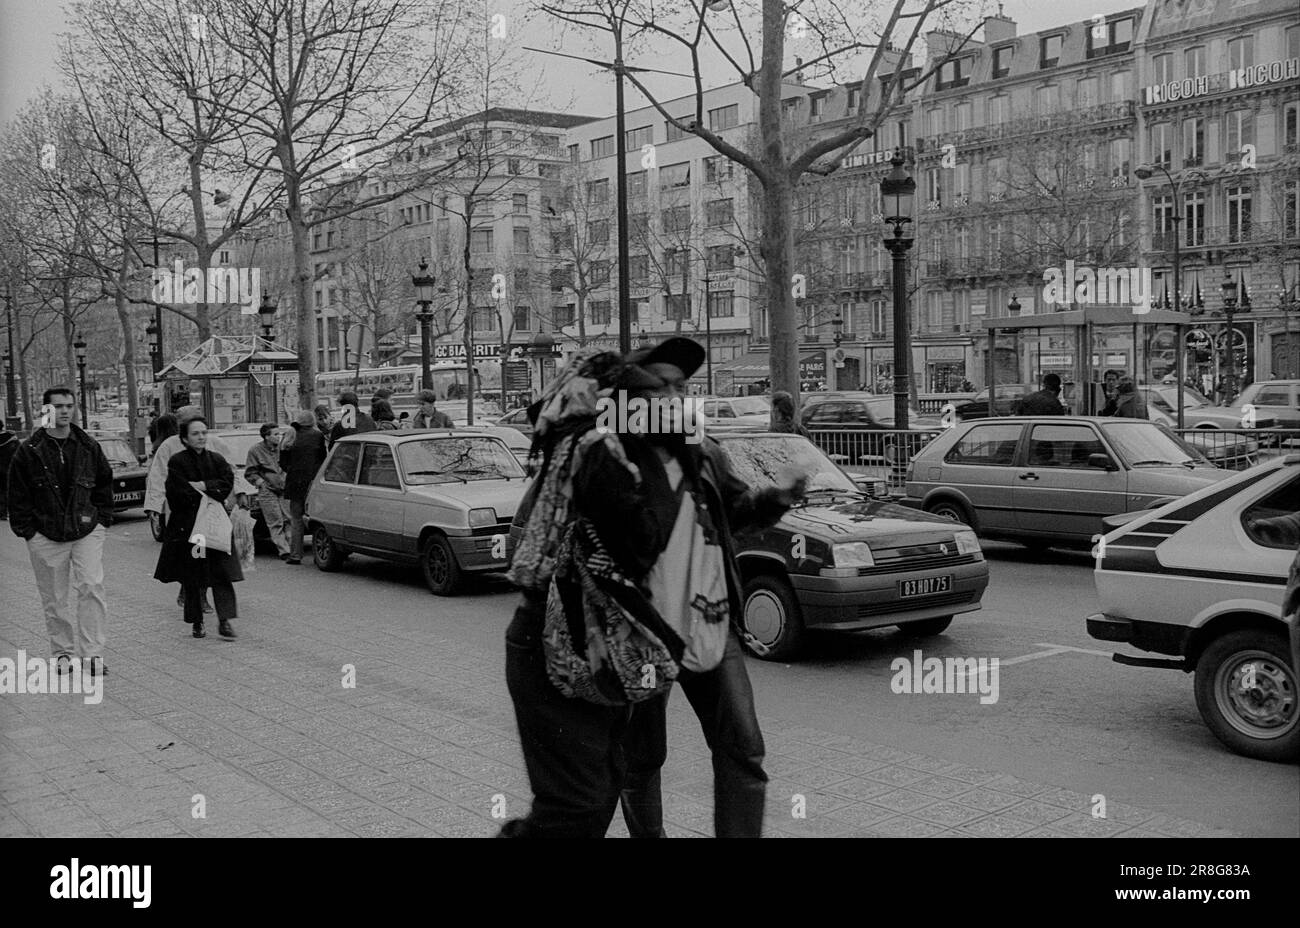 France, Paris, 25.03.1990, street scene in Paris, two French, Europe ...